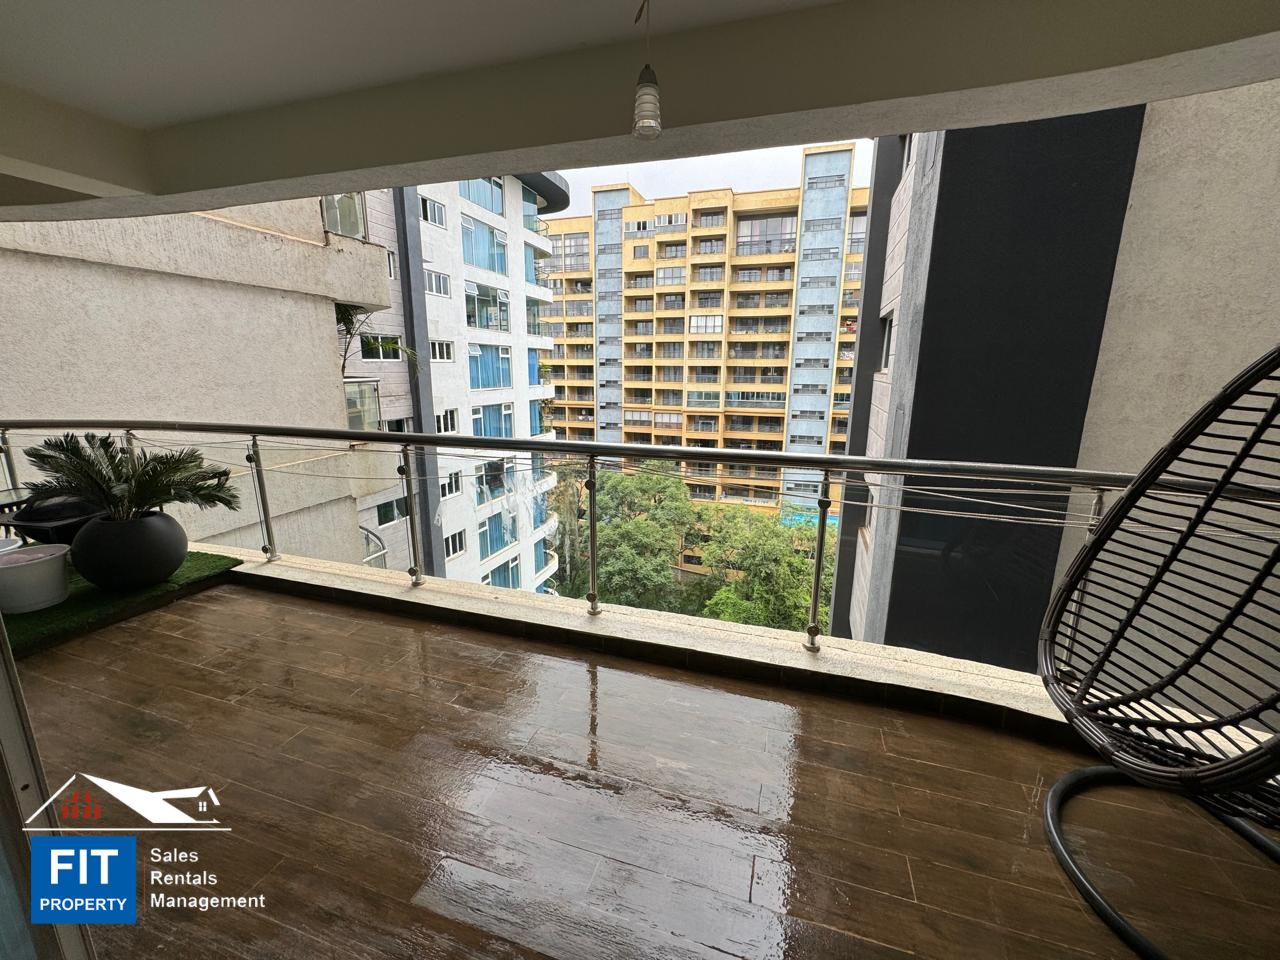 3 bedroom apartment for sale in Riverside, Nairobi. Close to the UoN Chiromo Campus and The Australian Embassy. 38 Million. Rent: 200,000 FIT Property